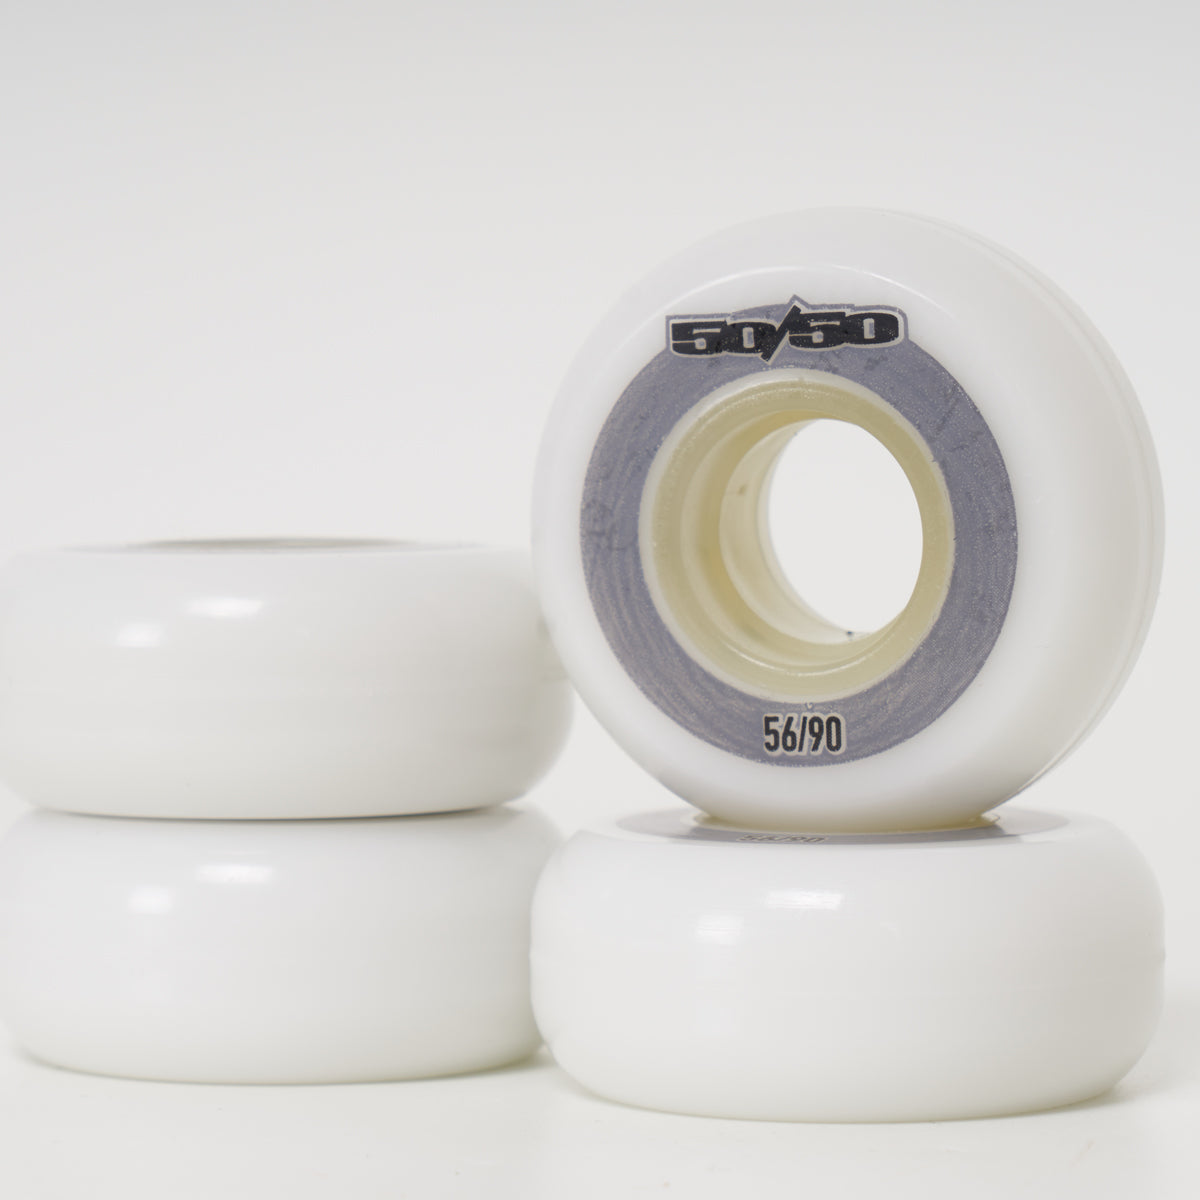 Fifty-50 56mm 90a Wheels - White